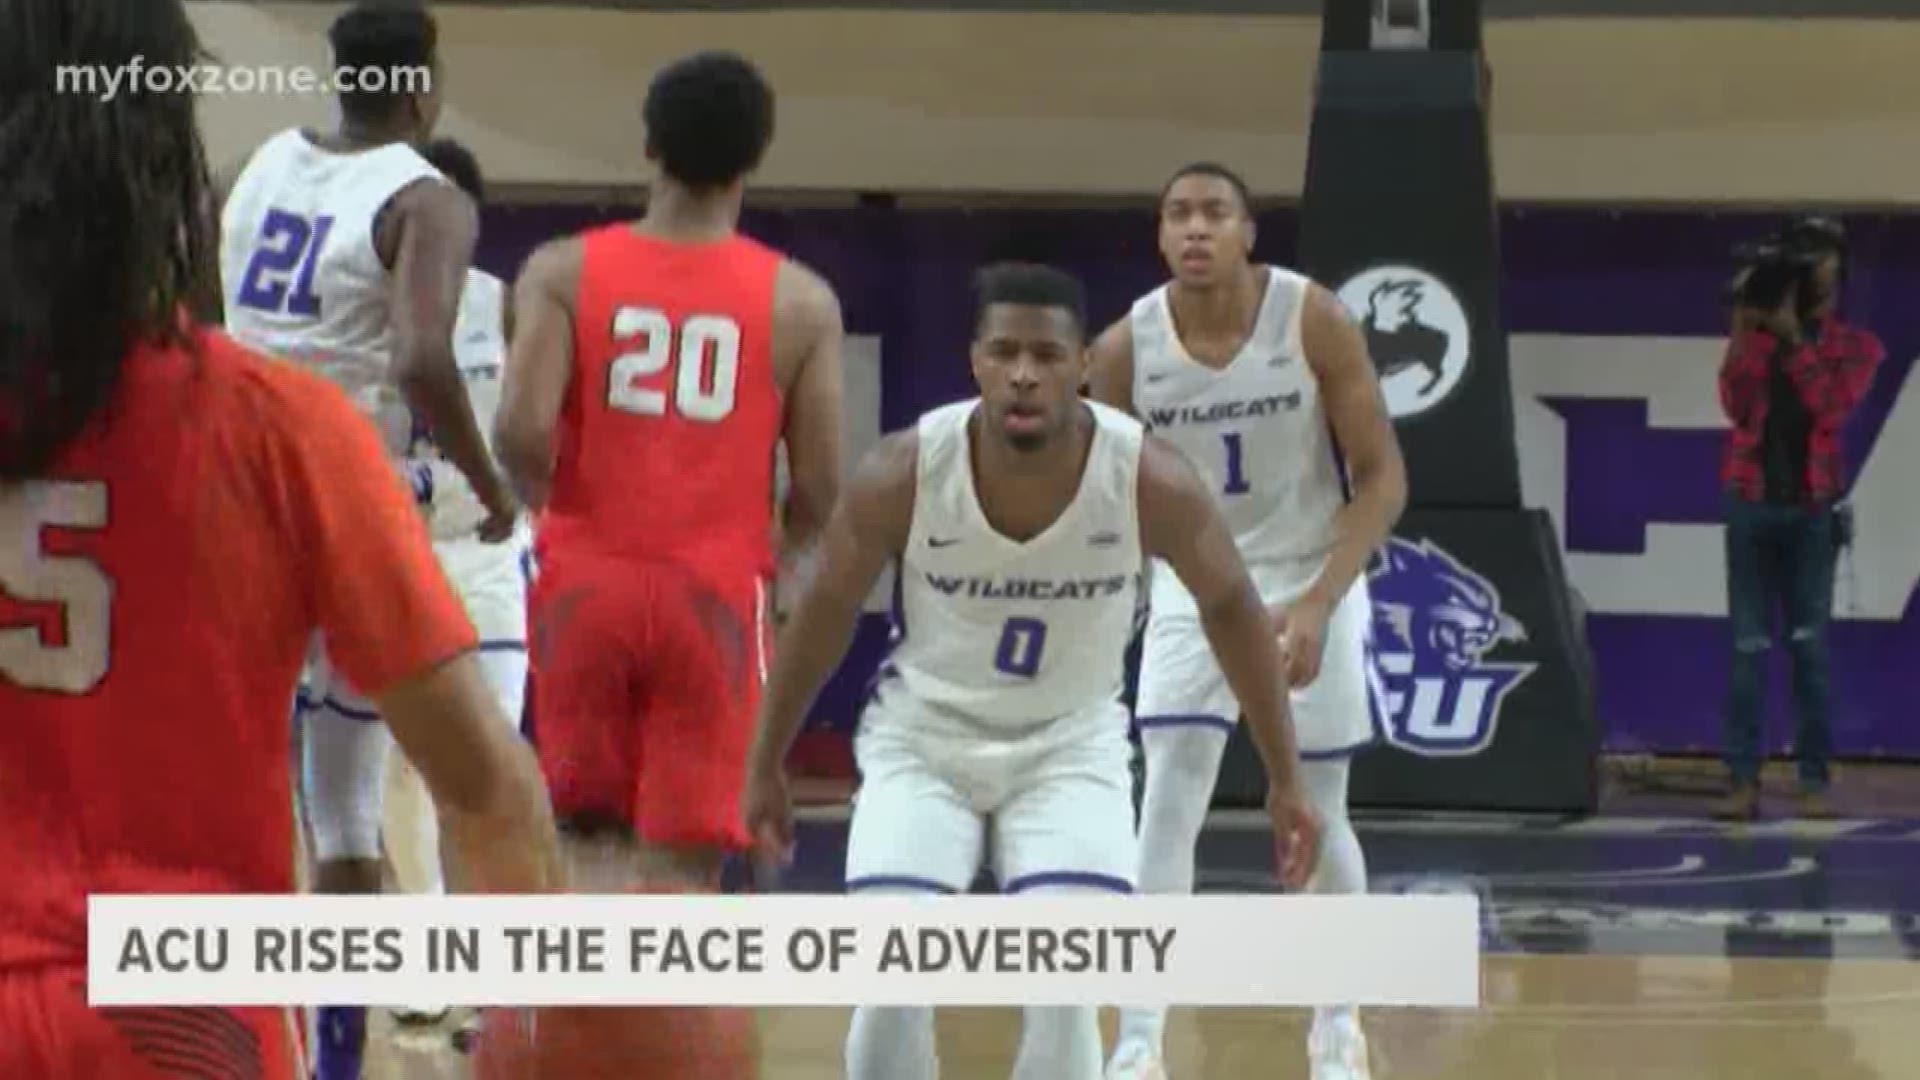 In the wake of adversity following the dismissal of Jalone Friday and BJ Maxwell, one might assume that ACU would falter. However, the Wildcats have faced adversity and have come out stronger on the other side.